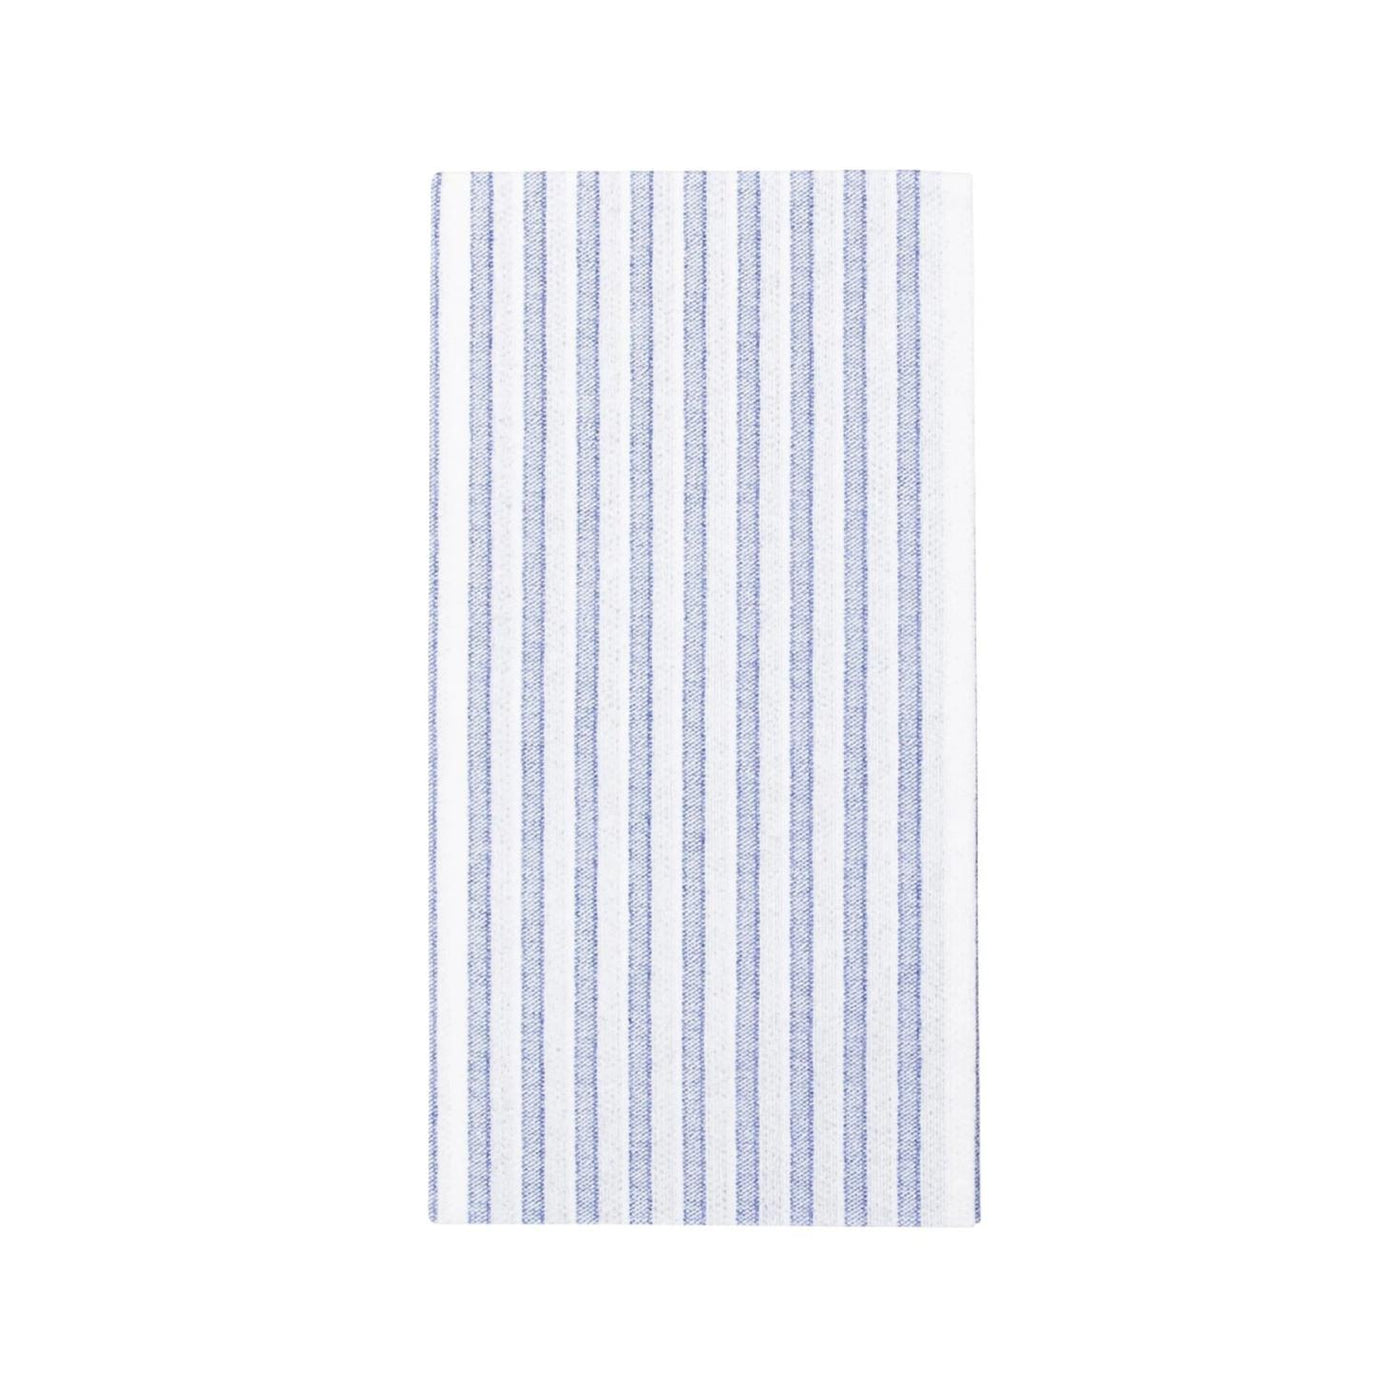 Vietri Papersoft Napkins Capri Guest Towels Pack Of 20-HOME/GIFTWARE-Blue-Kevin's Fine Outdoor Gear & Apparel